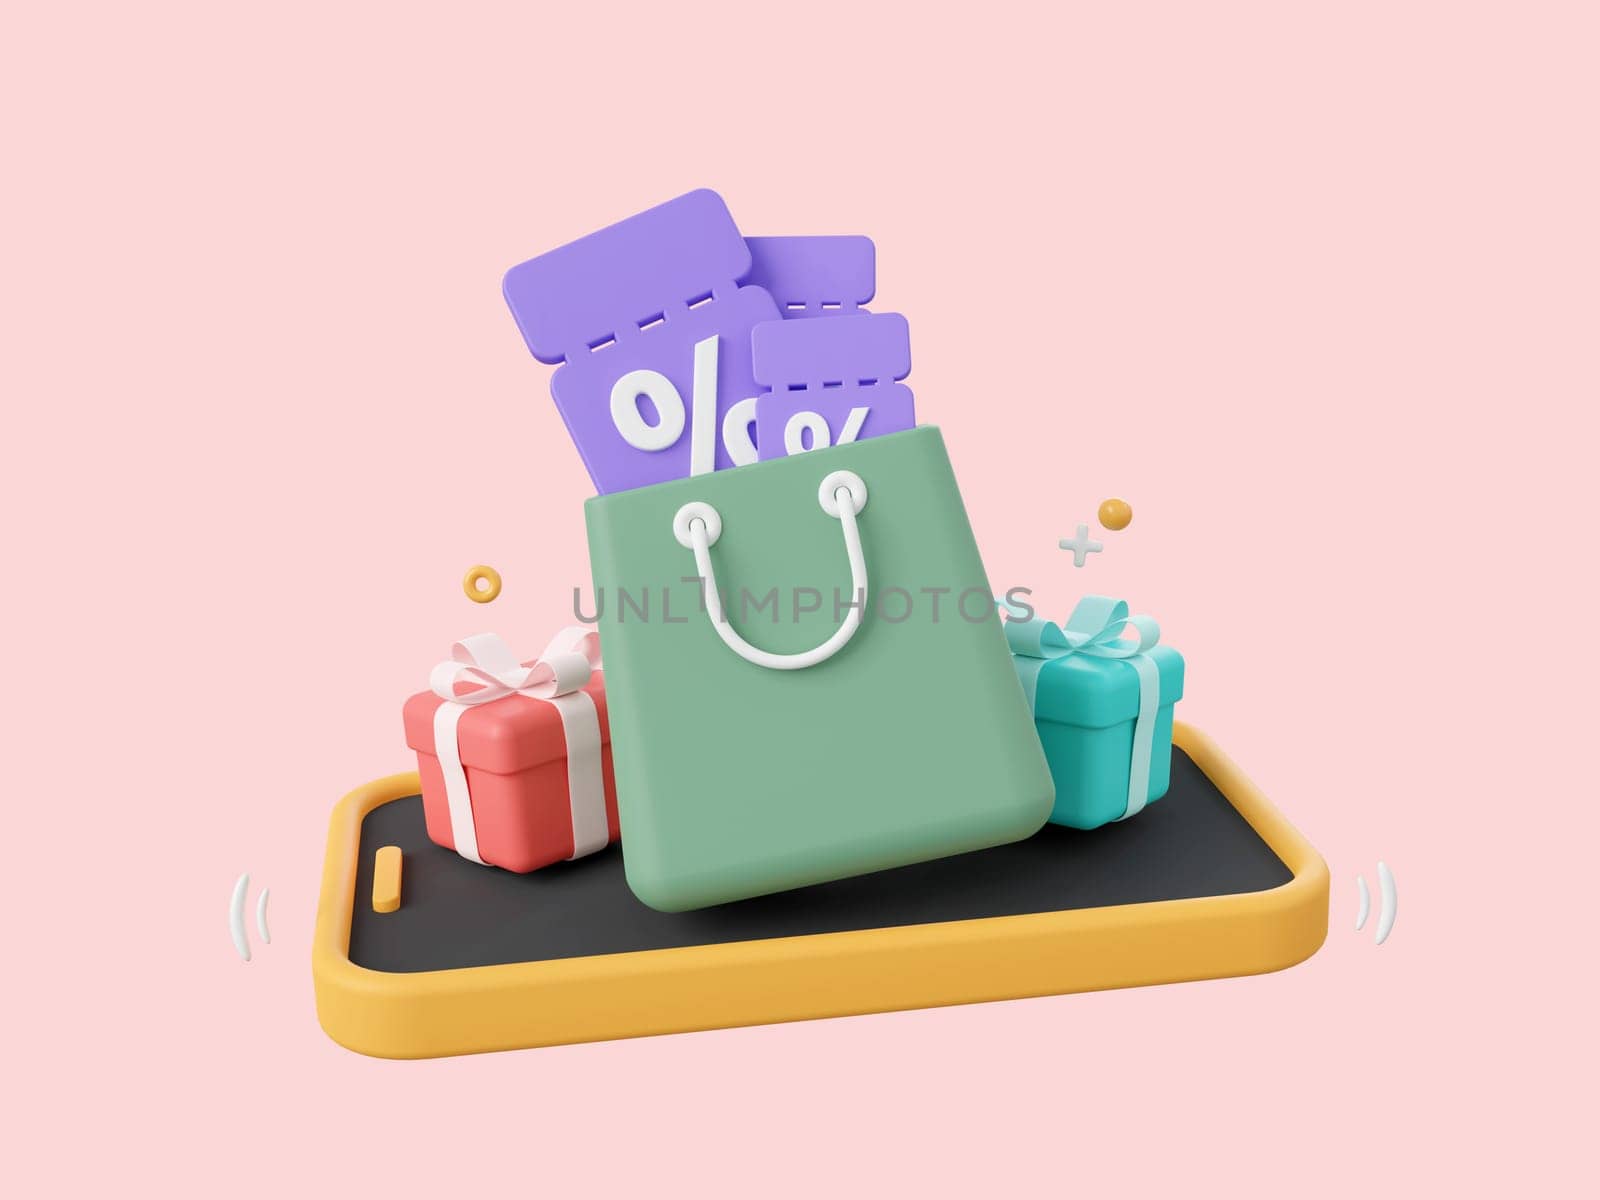 3d cartoon design illustration of Smartphone with discount code, gift boxes and shopping bag, Shopping online advertising marketing promotion concept. by nutzchotwarut